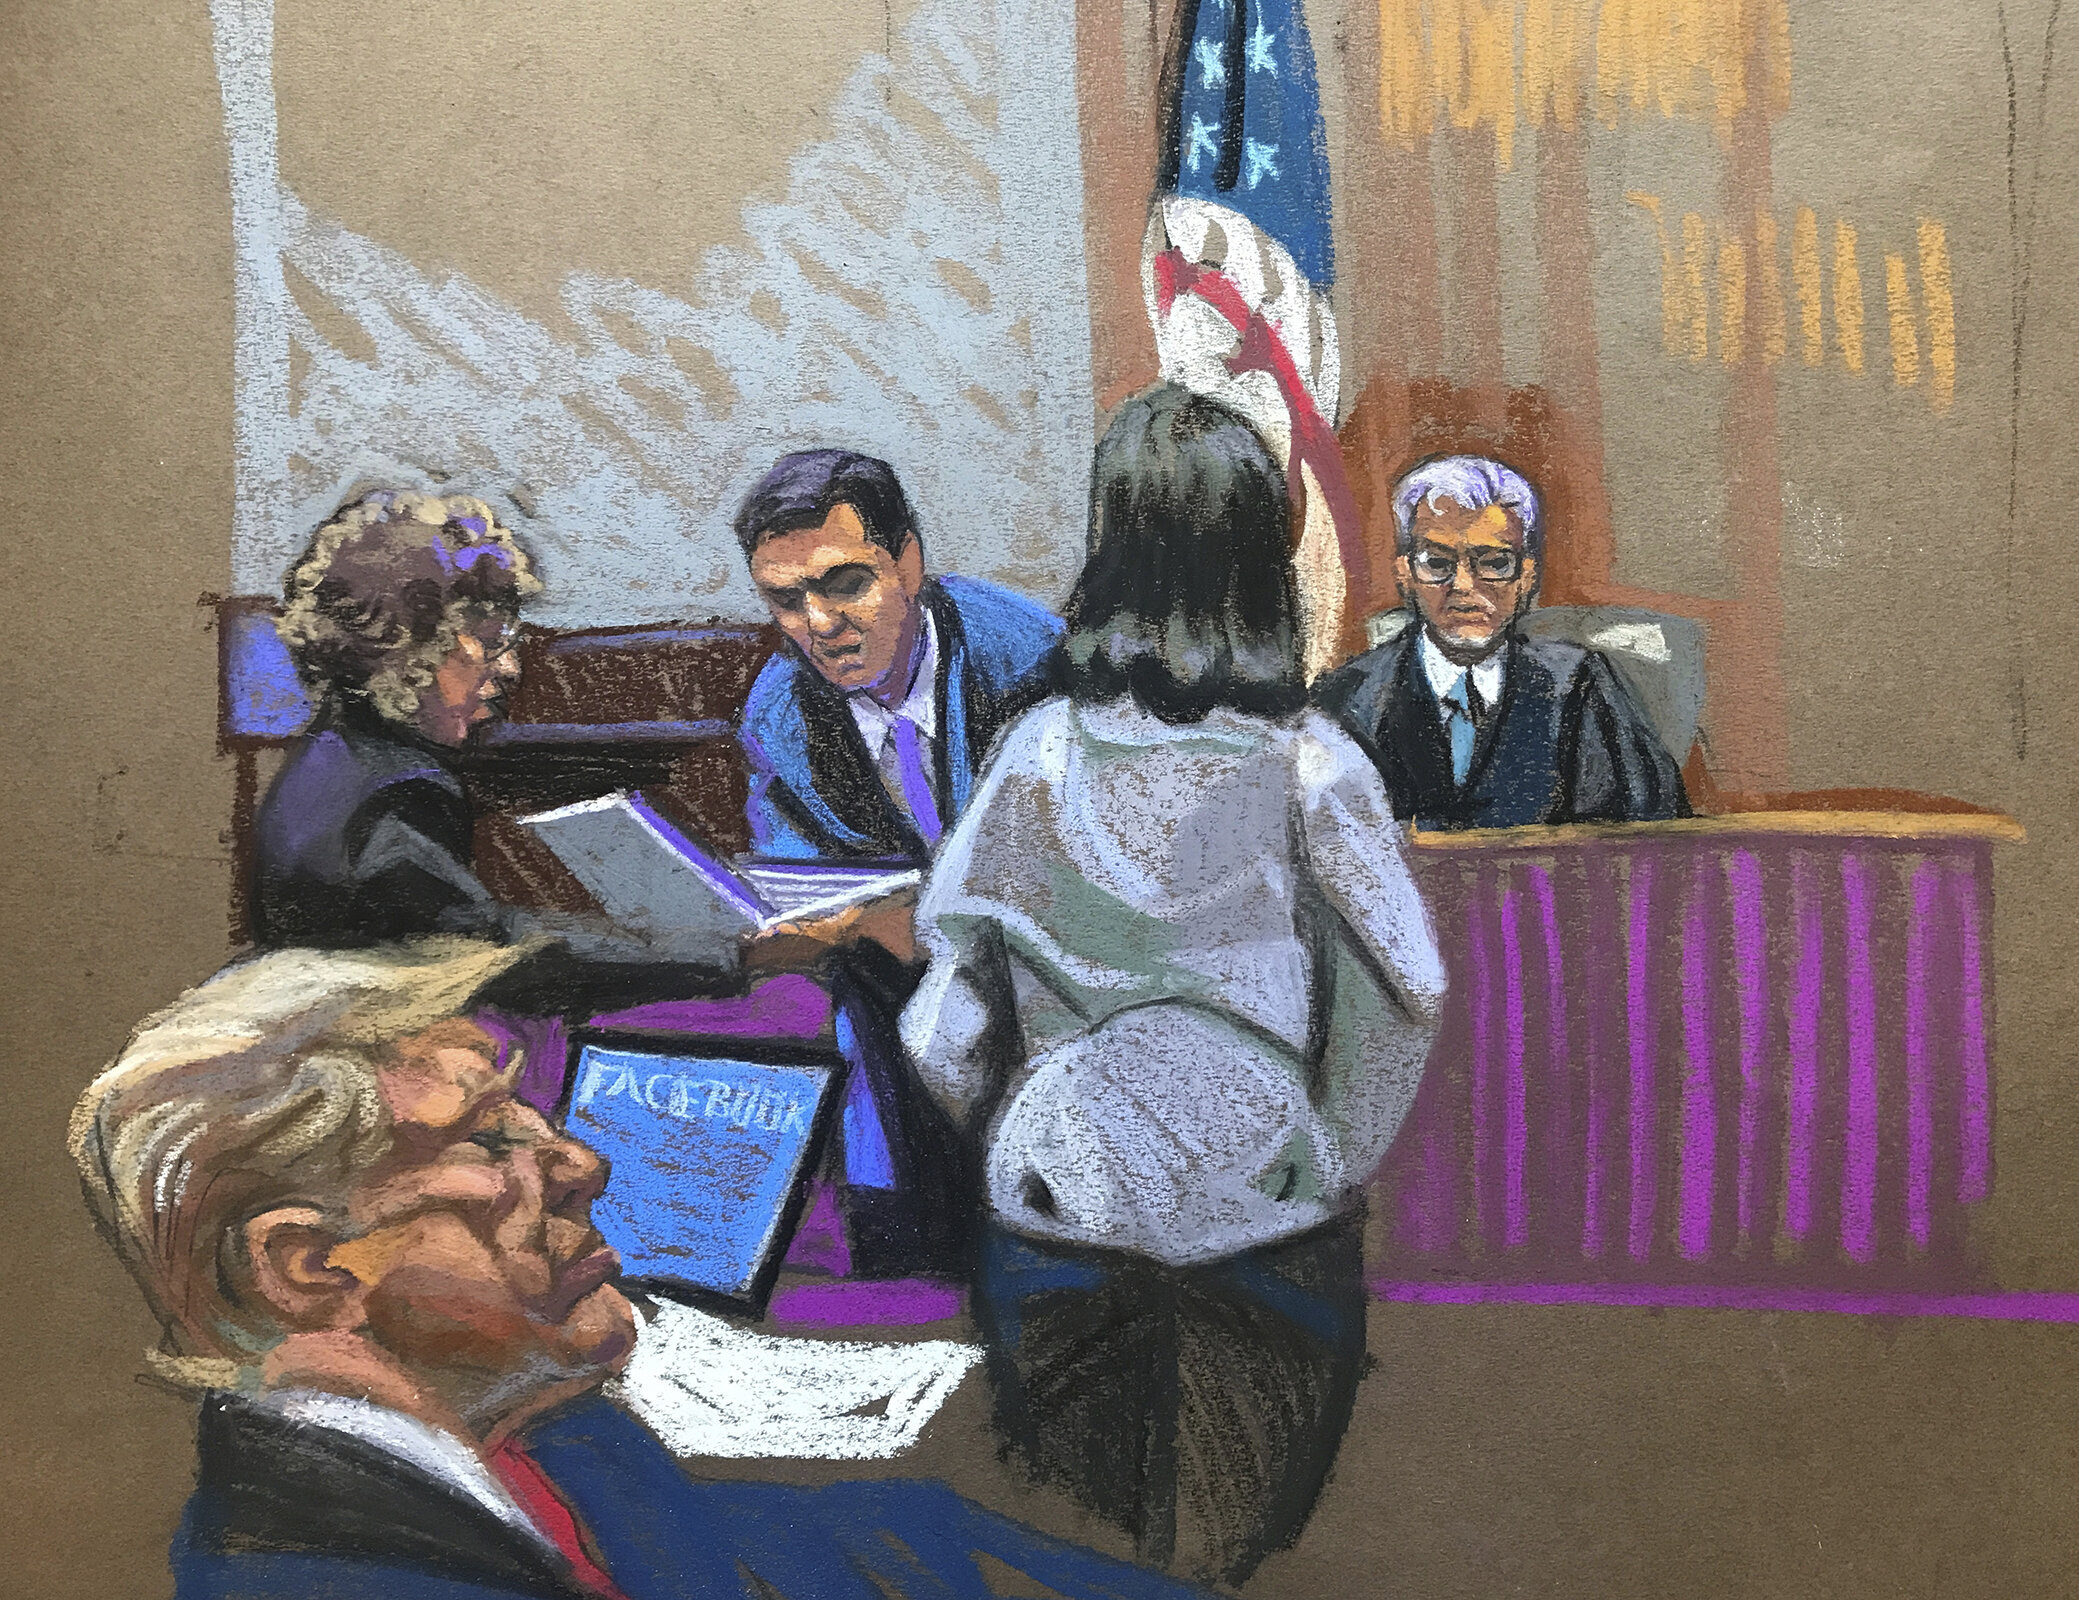 courtroom sketch artist enjoys drawing 1 particular element in trump trial